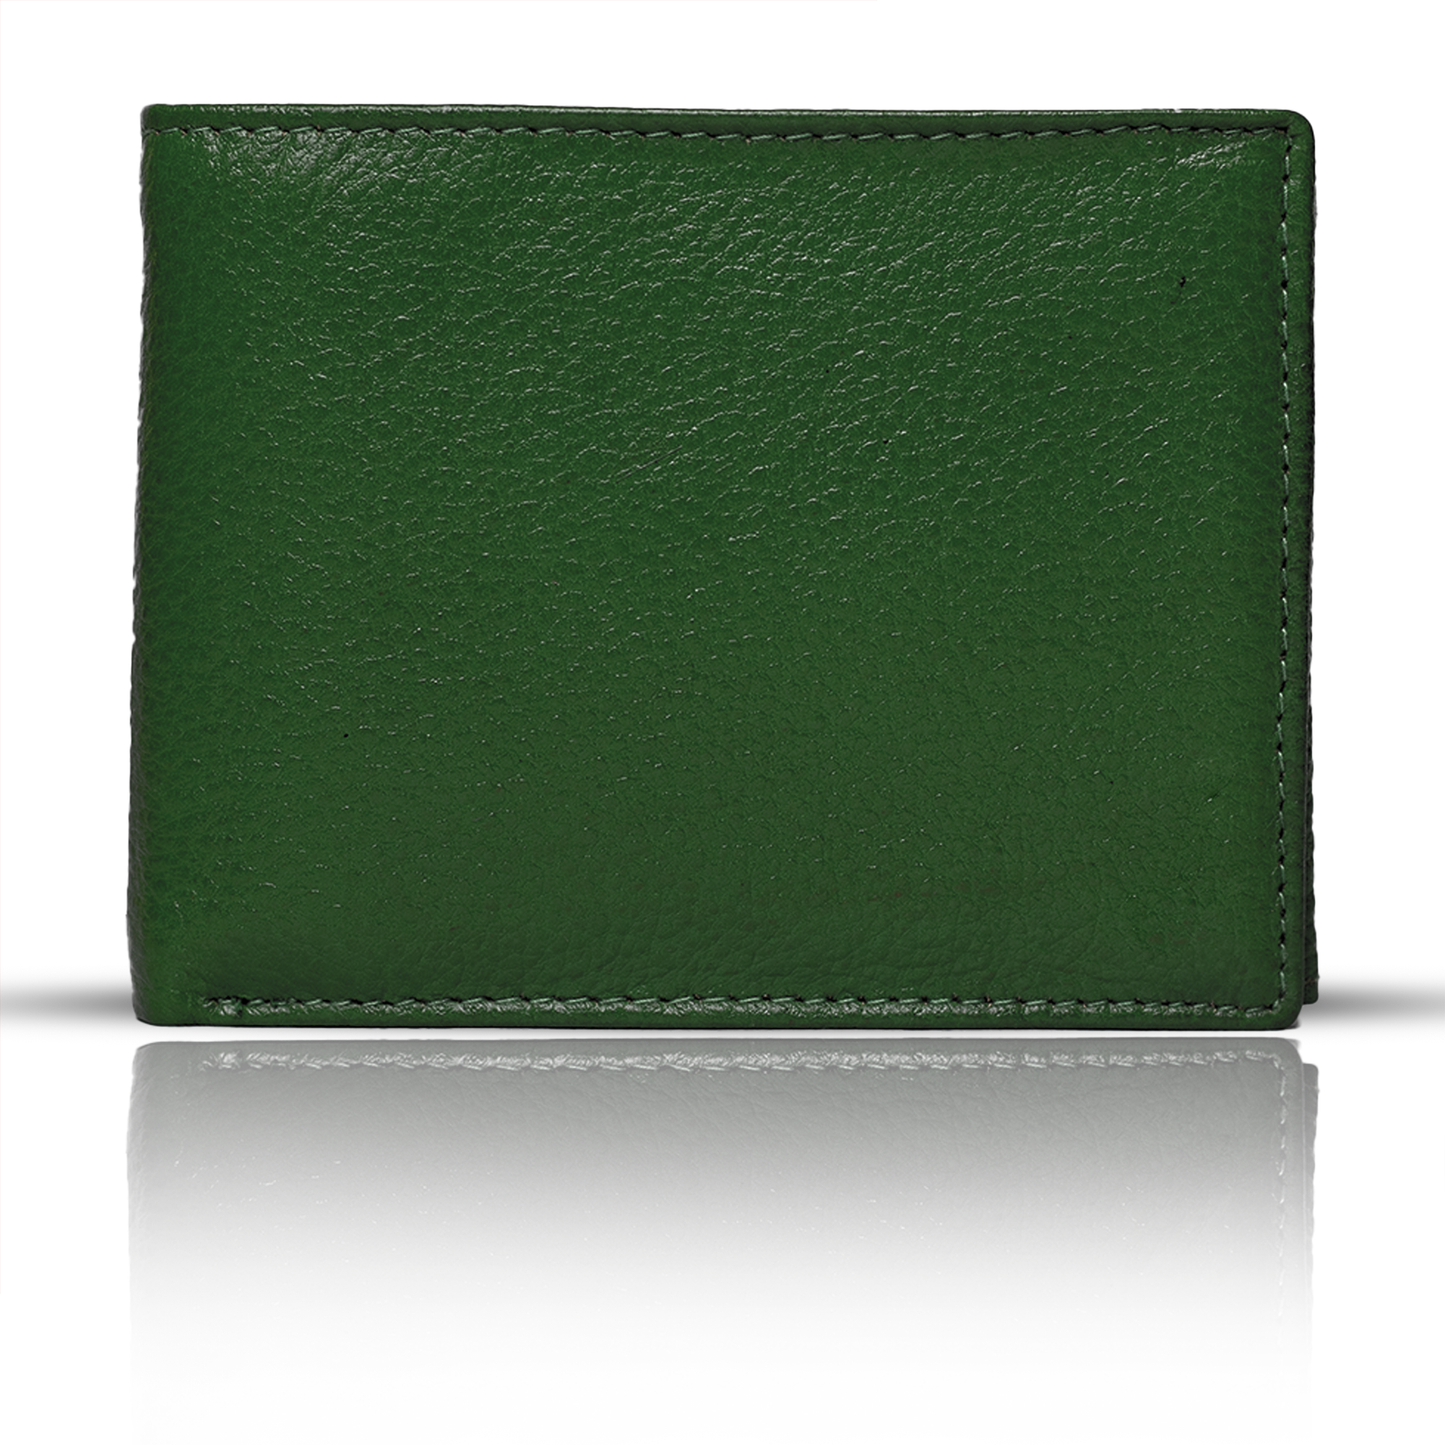 Crunch Leather RFID Wallets: Stylish Security for Modern Living